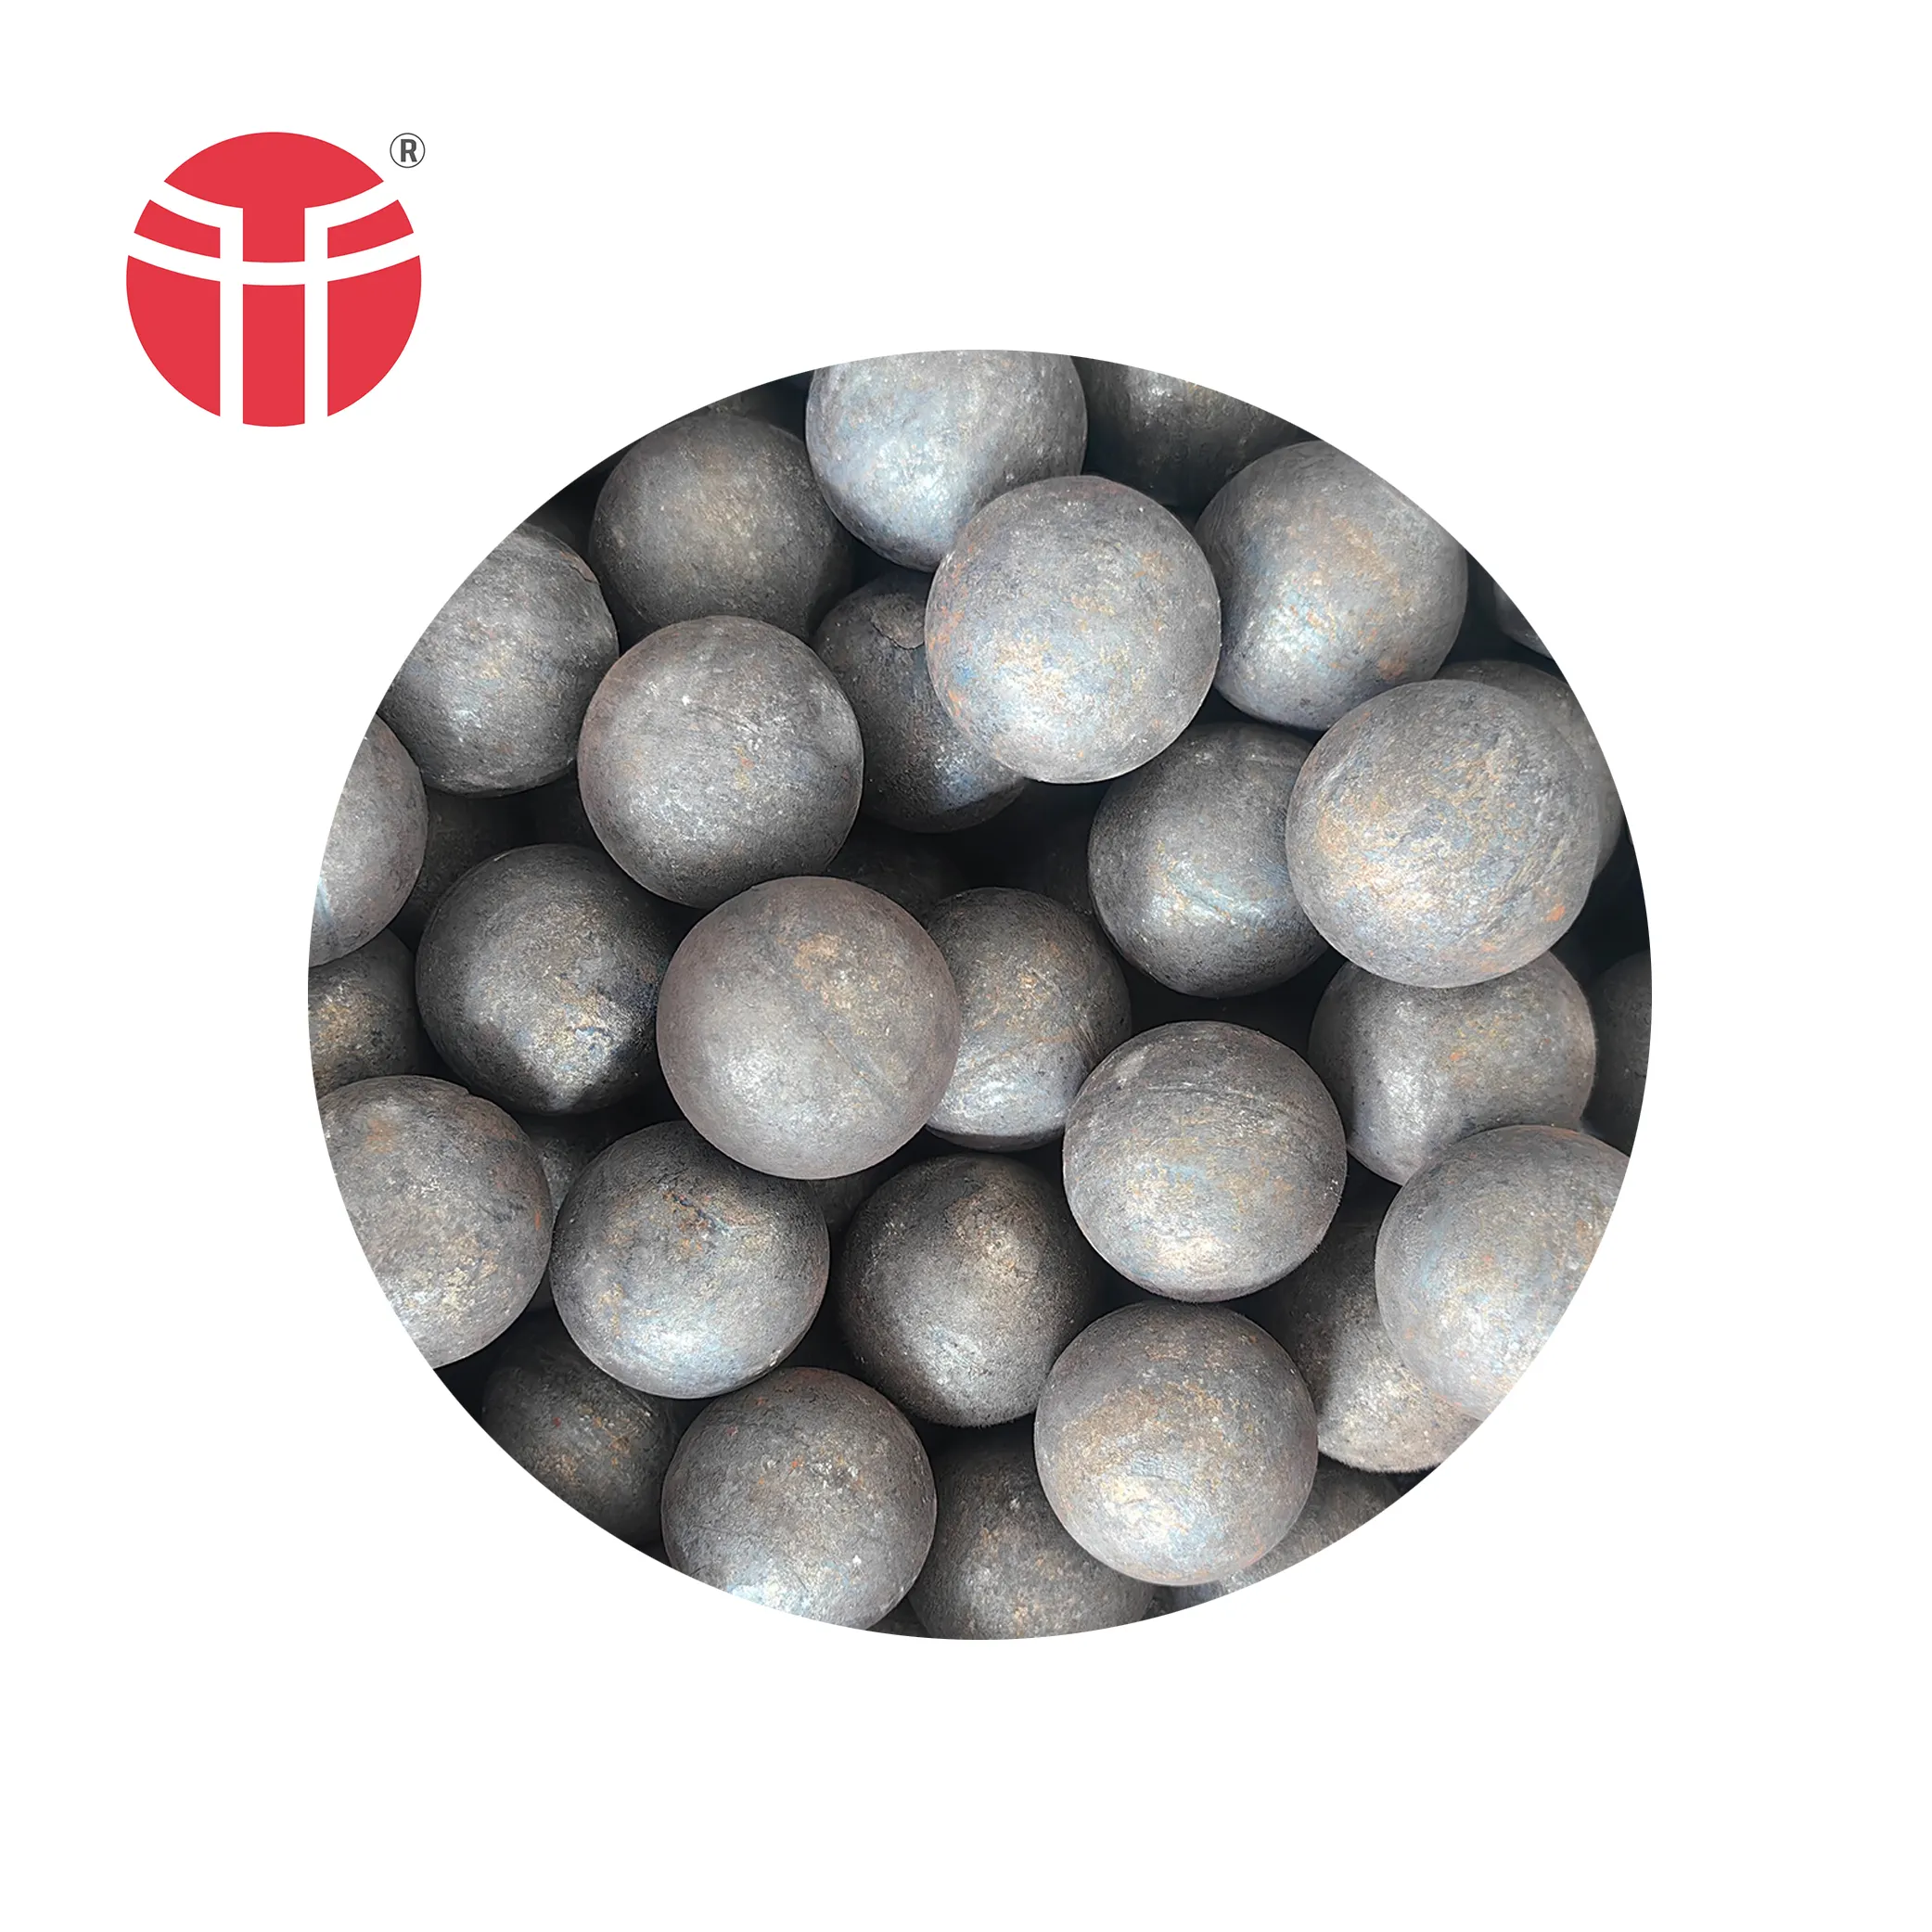 High Quality Casting Cast And Forged Grinding Media Carbon Iron Steel Ball For Sale Ball Mill Mine With 65Mn B2 B3 40Cr Gcr15